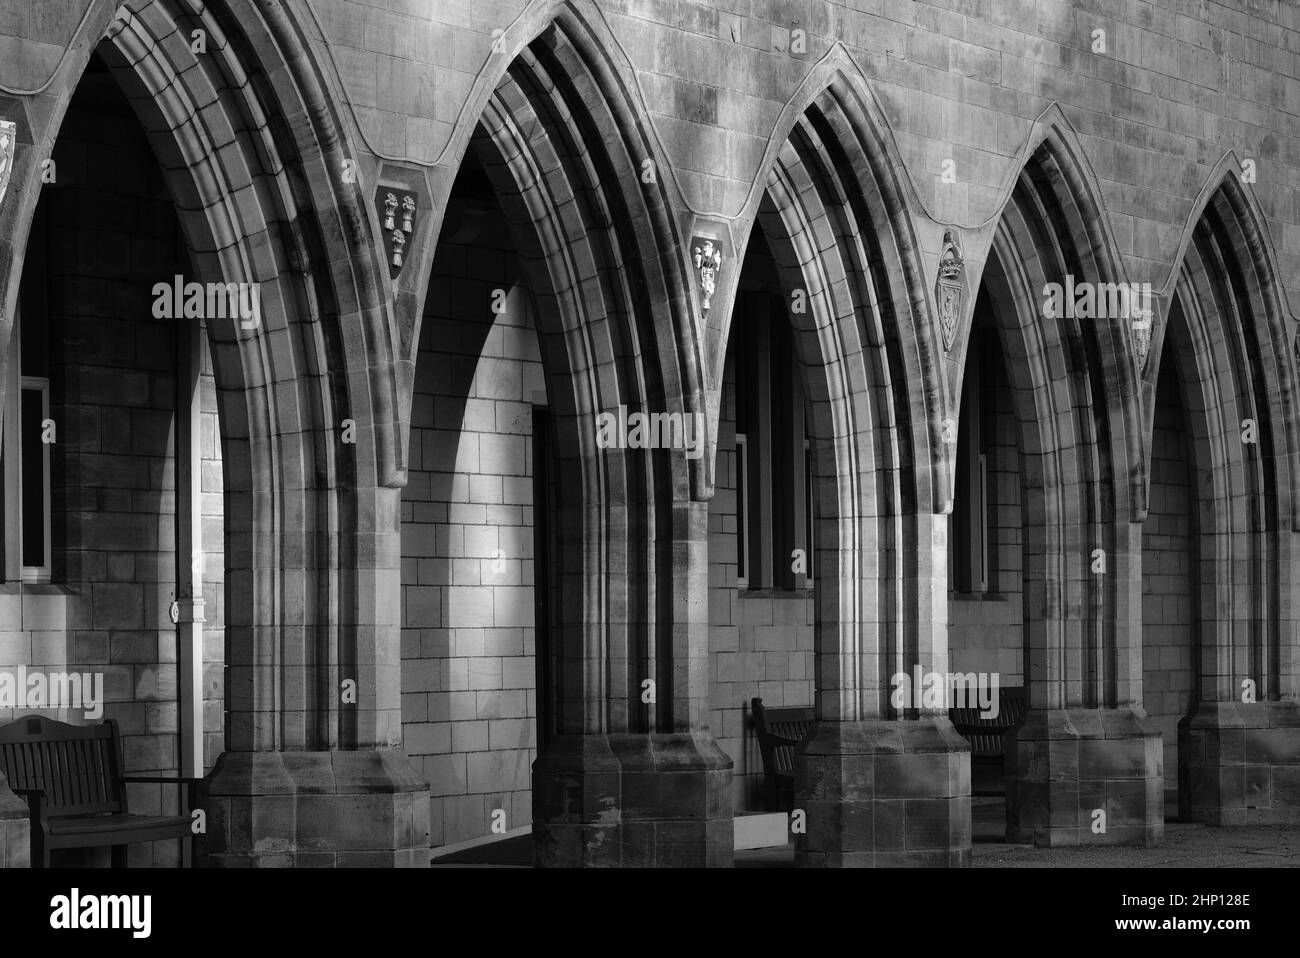 A black and white photograph of the stone arches and cloistered walkway which are part of Elphinstone Hall, Aberdeen University, Aberdeen, Scotland. Stock Photo